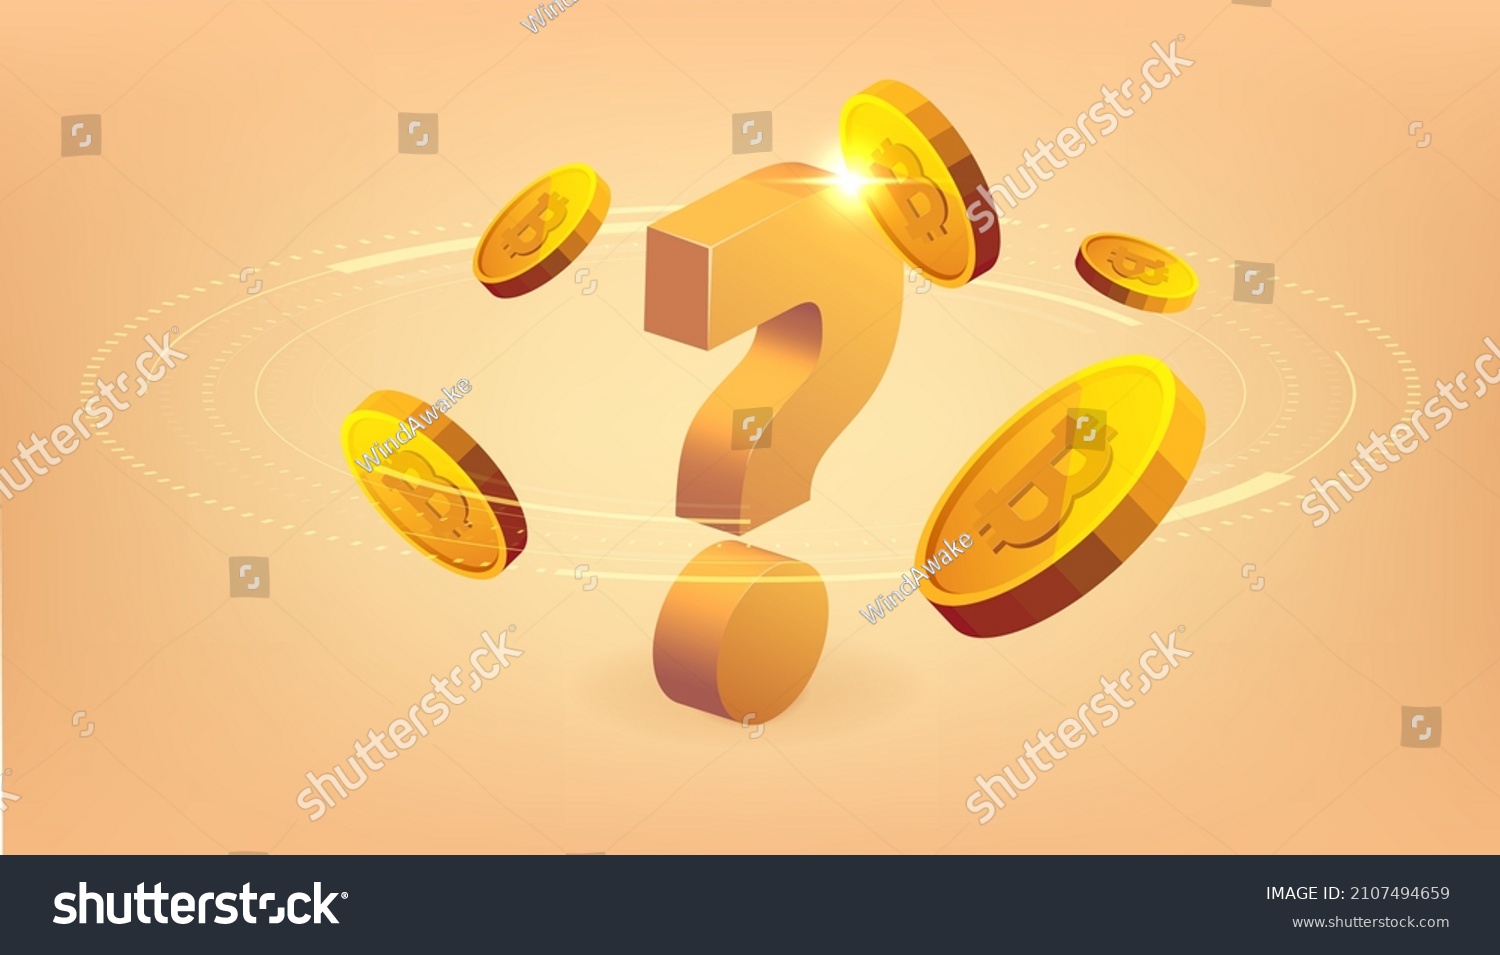 SVG of Gold coins with question mark sign. Bitcoin coin cryptocurrency concept banner background. svg